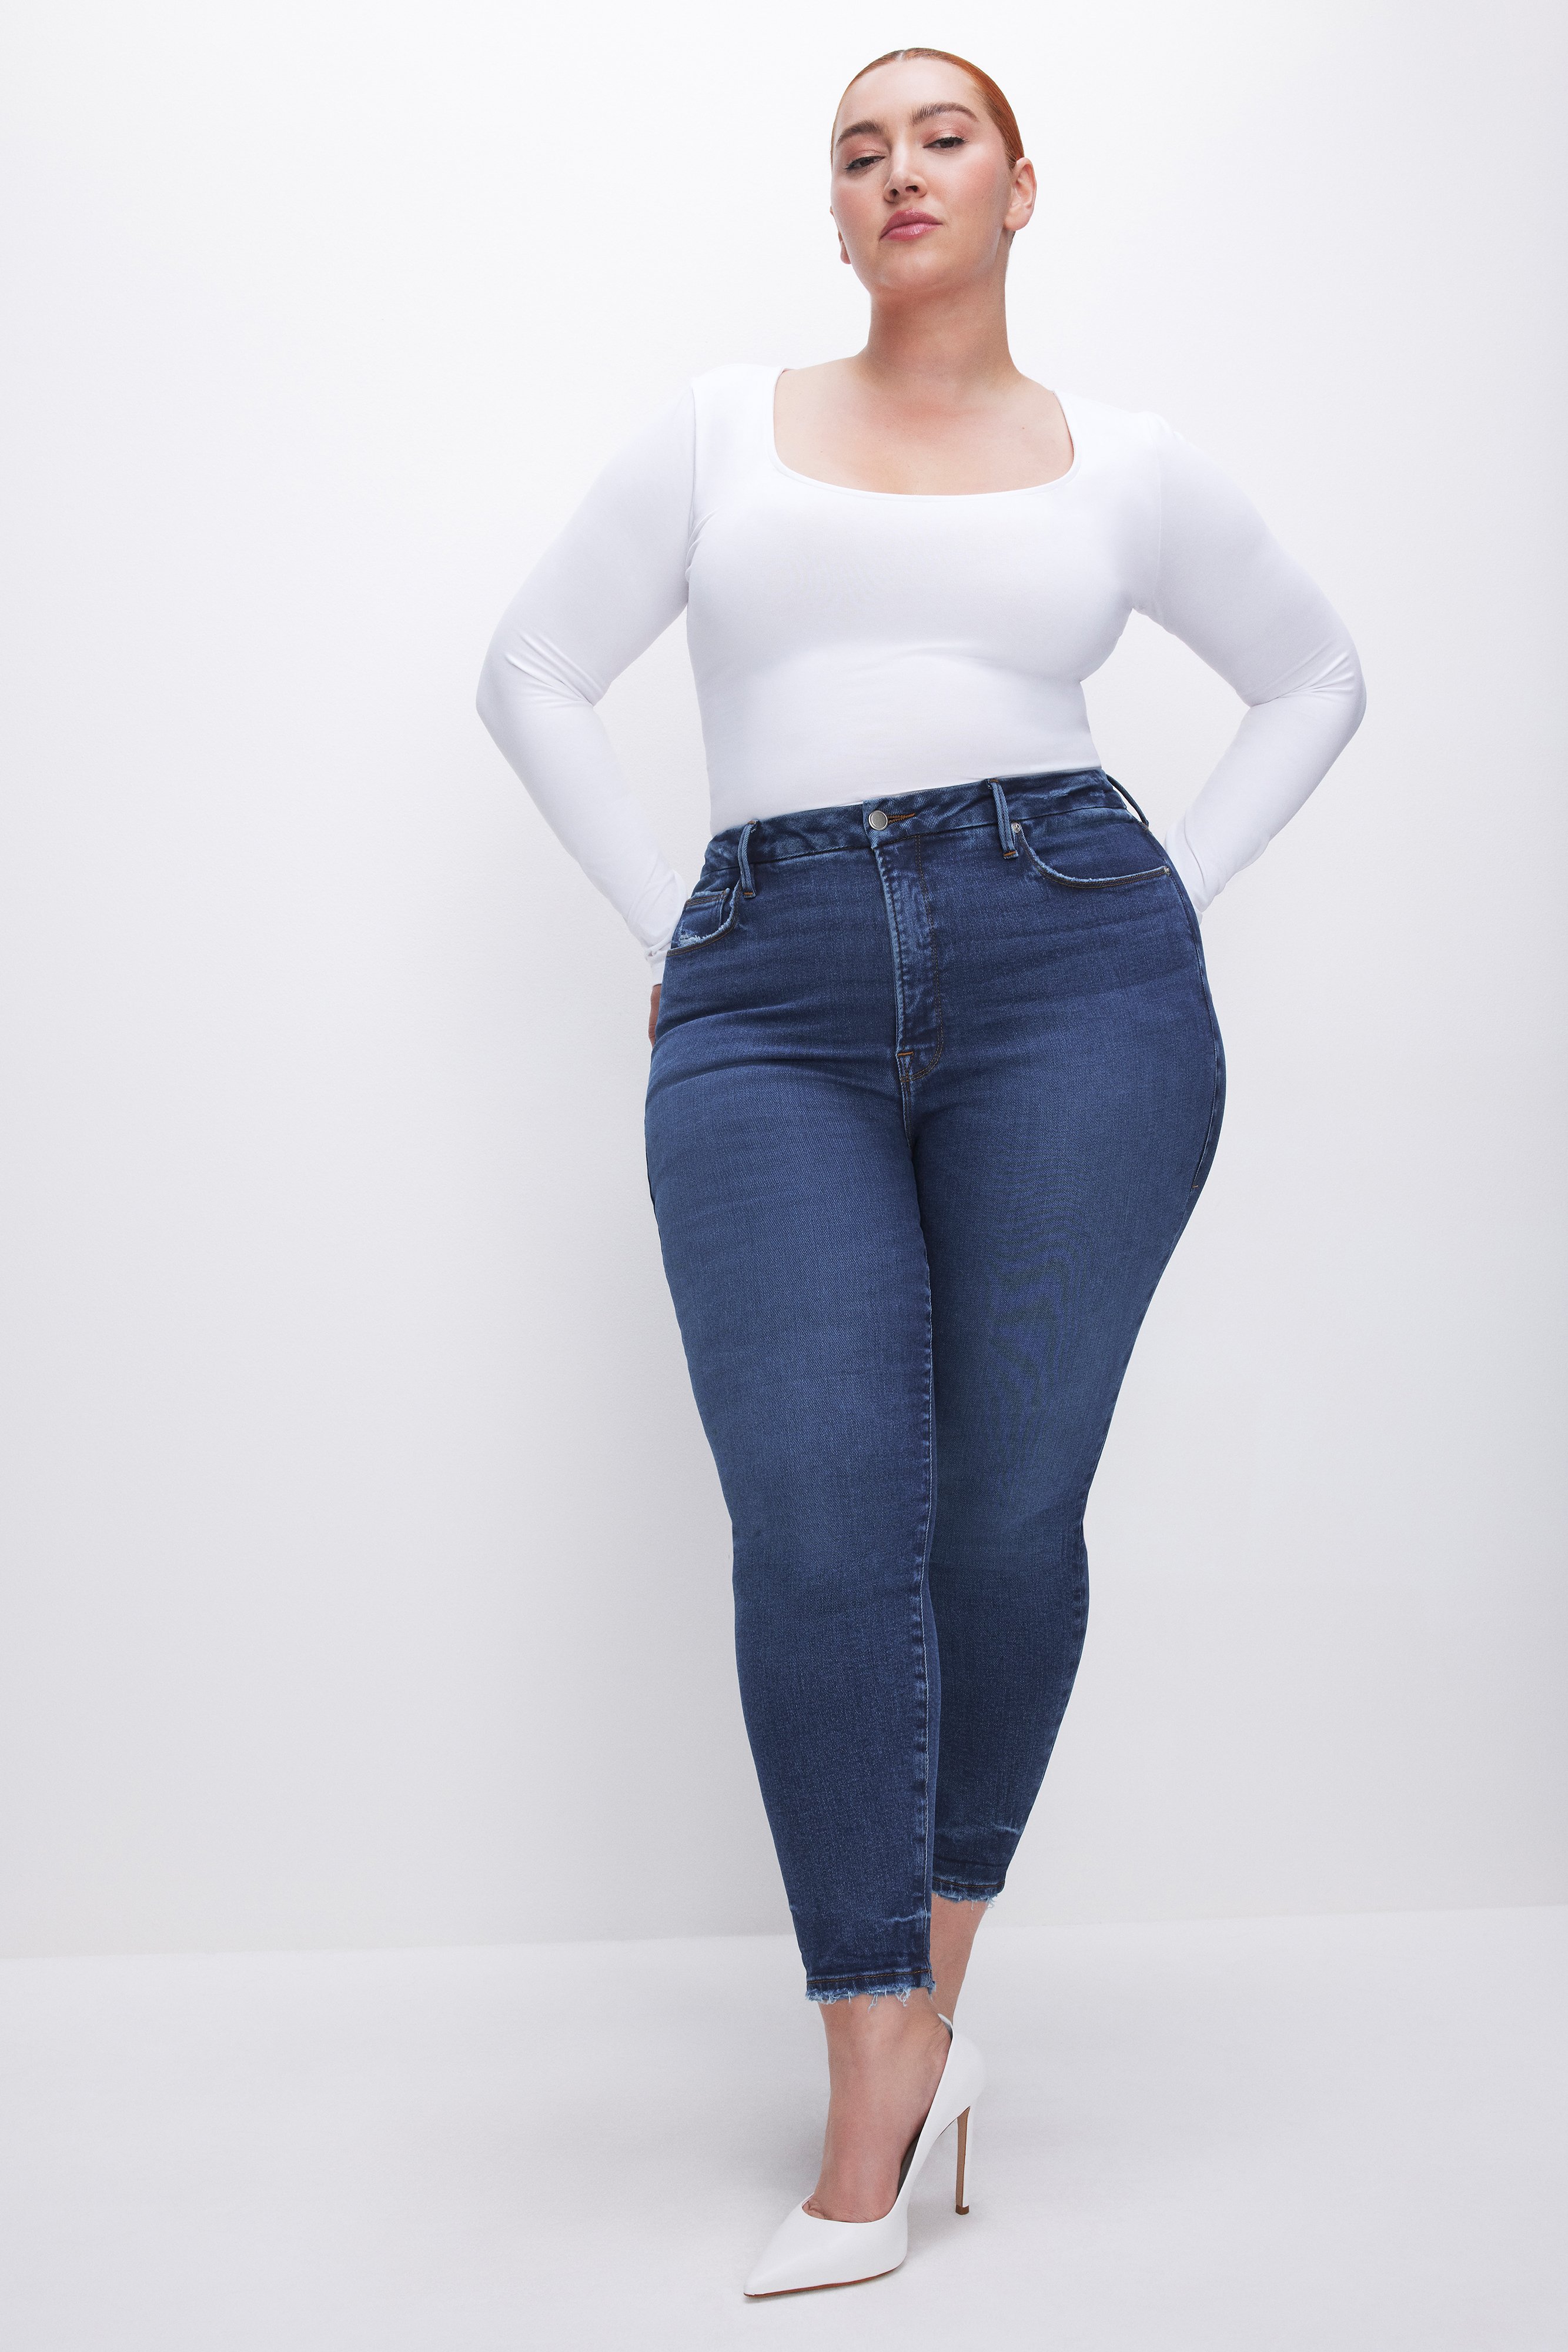 Navy blue: The bright plus size denim look for autumn in compression tights  - Lipedema Mode (soon: POWER SPROTTE - The Blog)